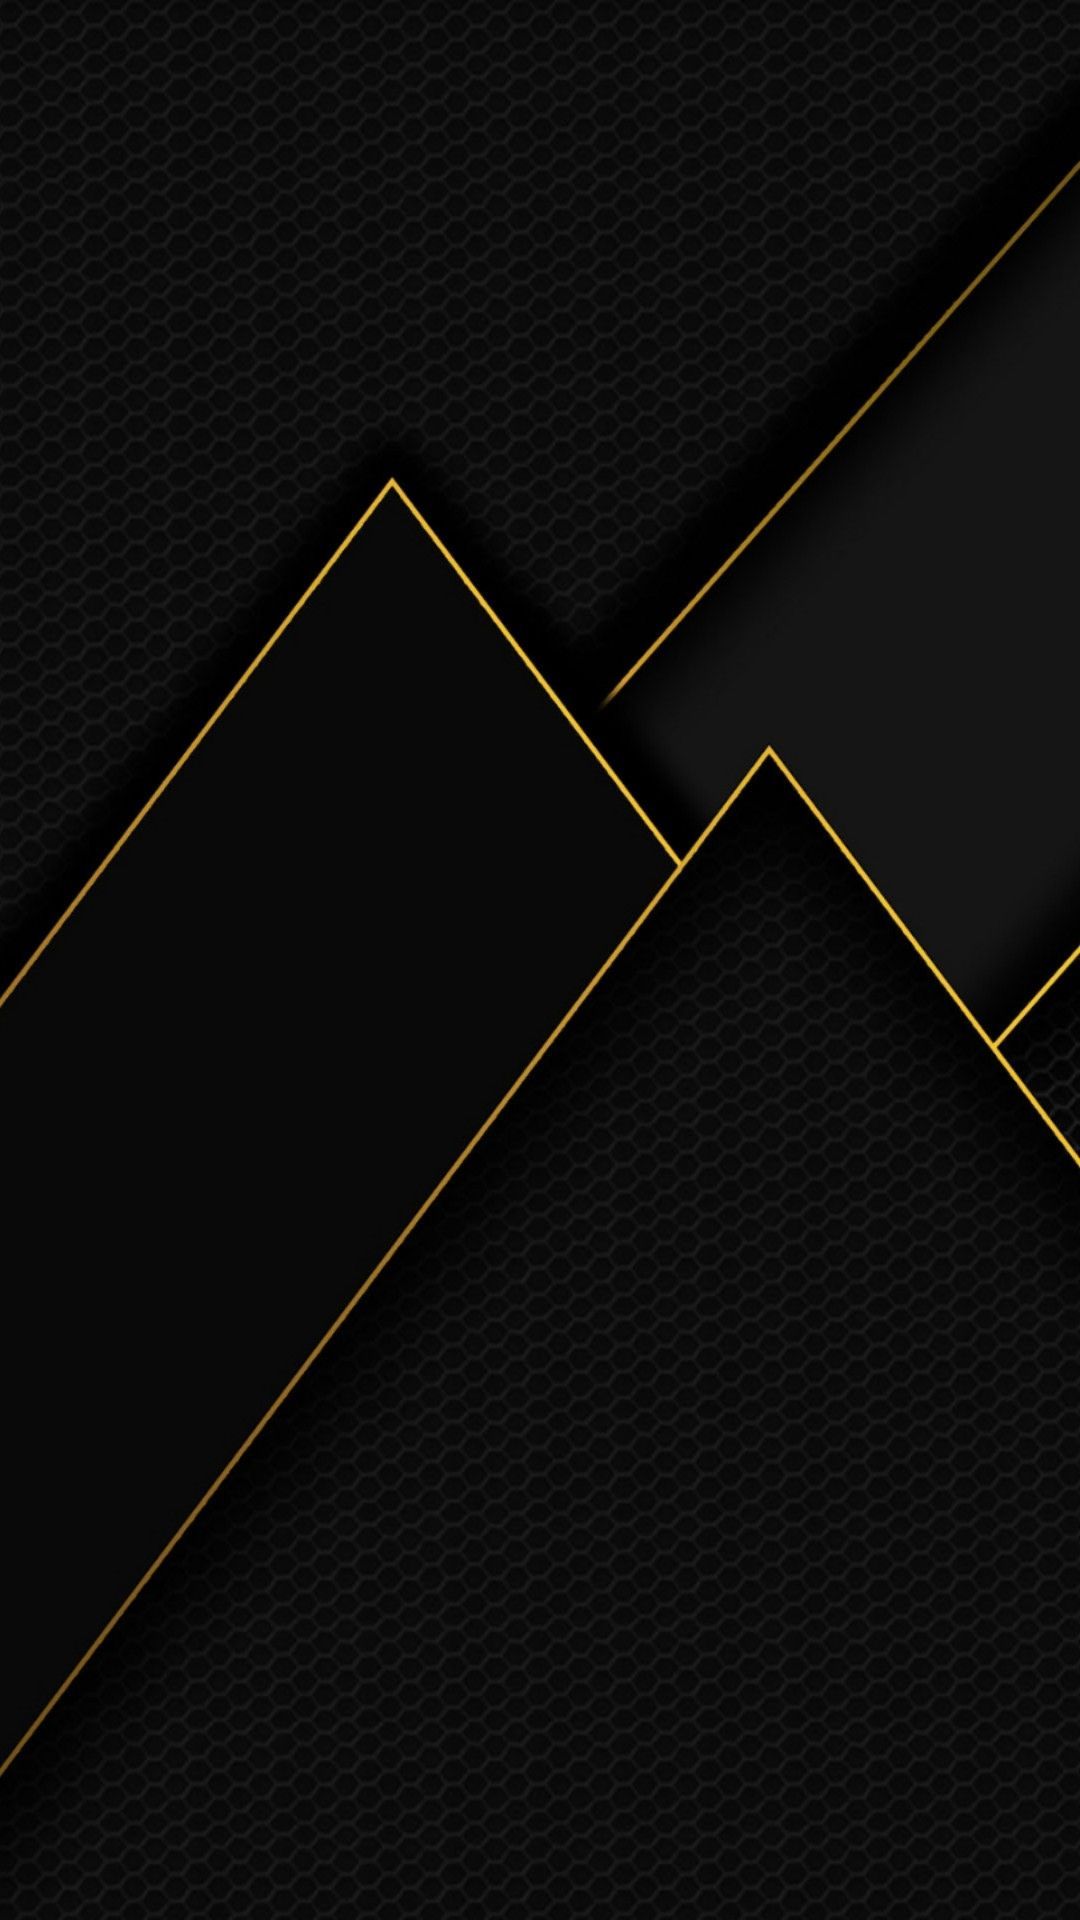 Black and Gold Wallpaper